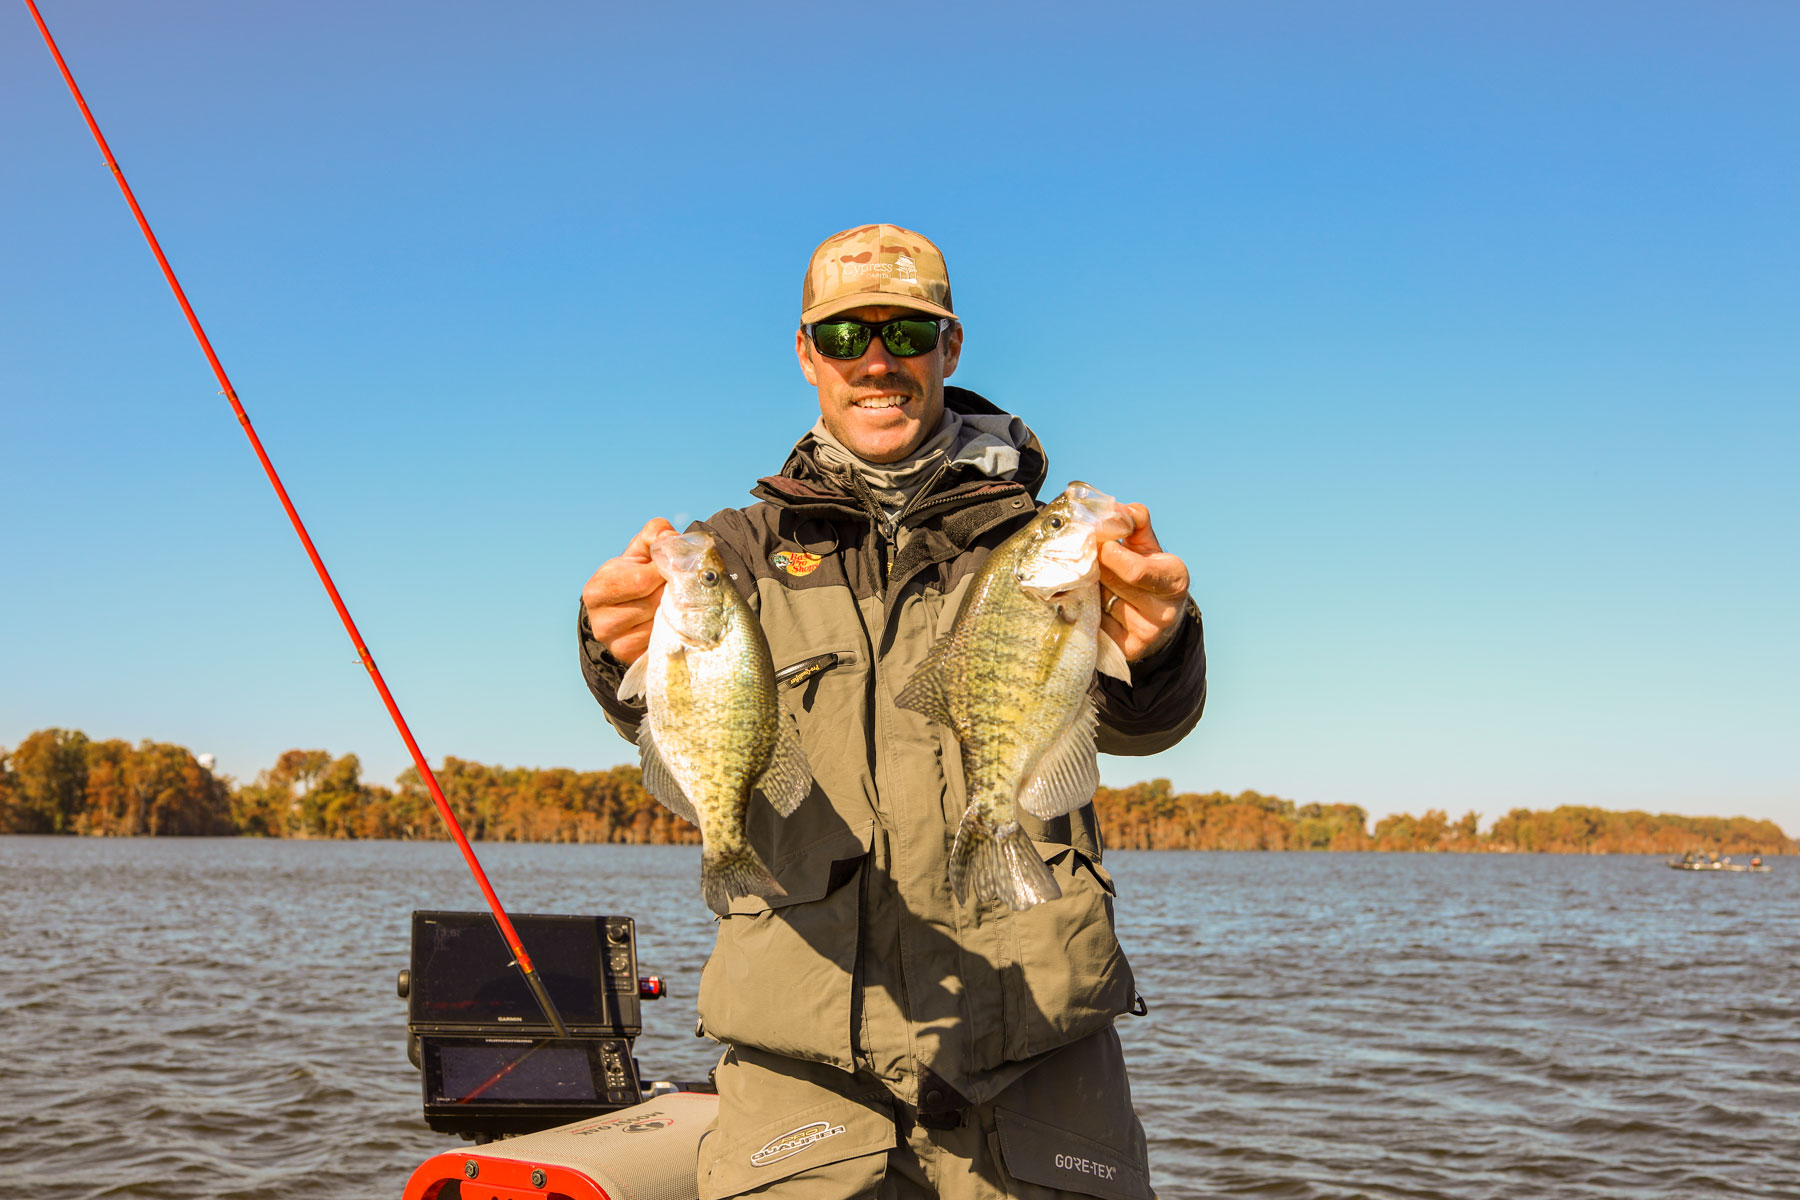 MWO Crappie Fishing Articles- Seaonal Patterns, Tips, and Techniques!